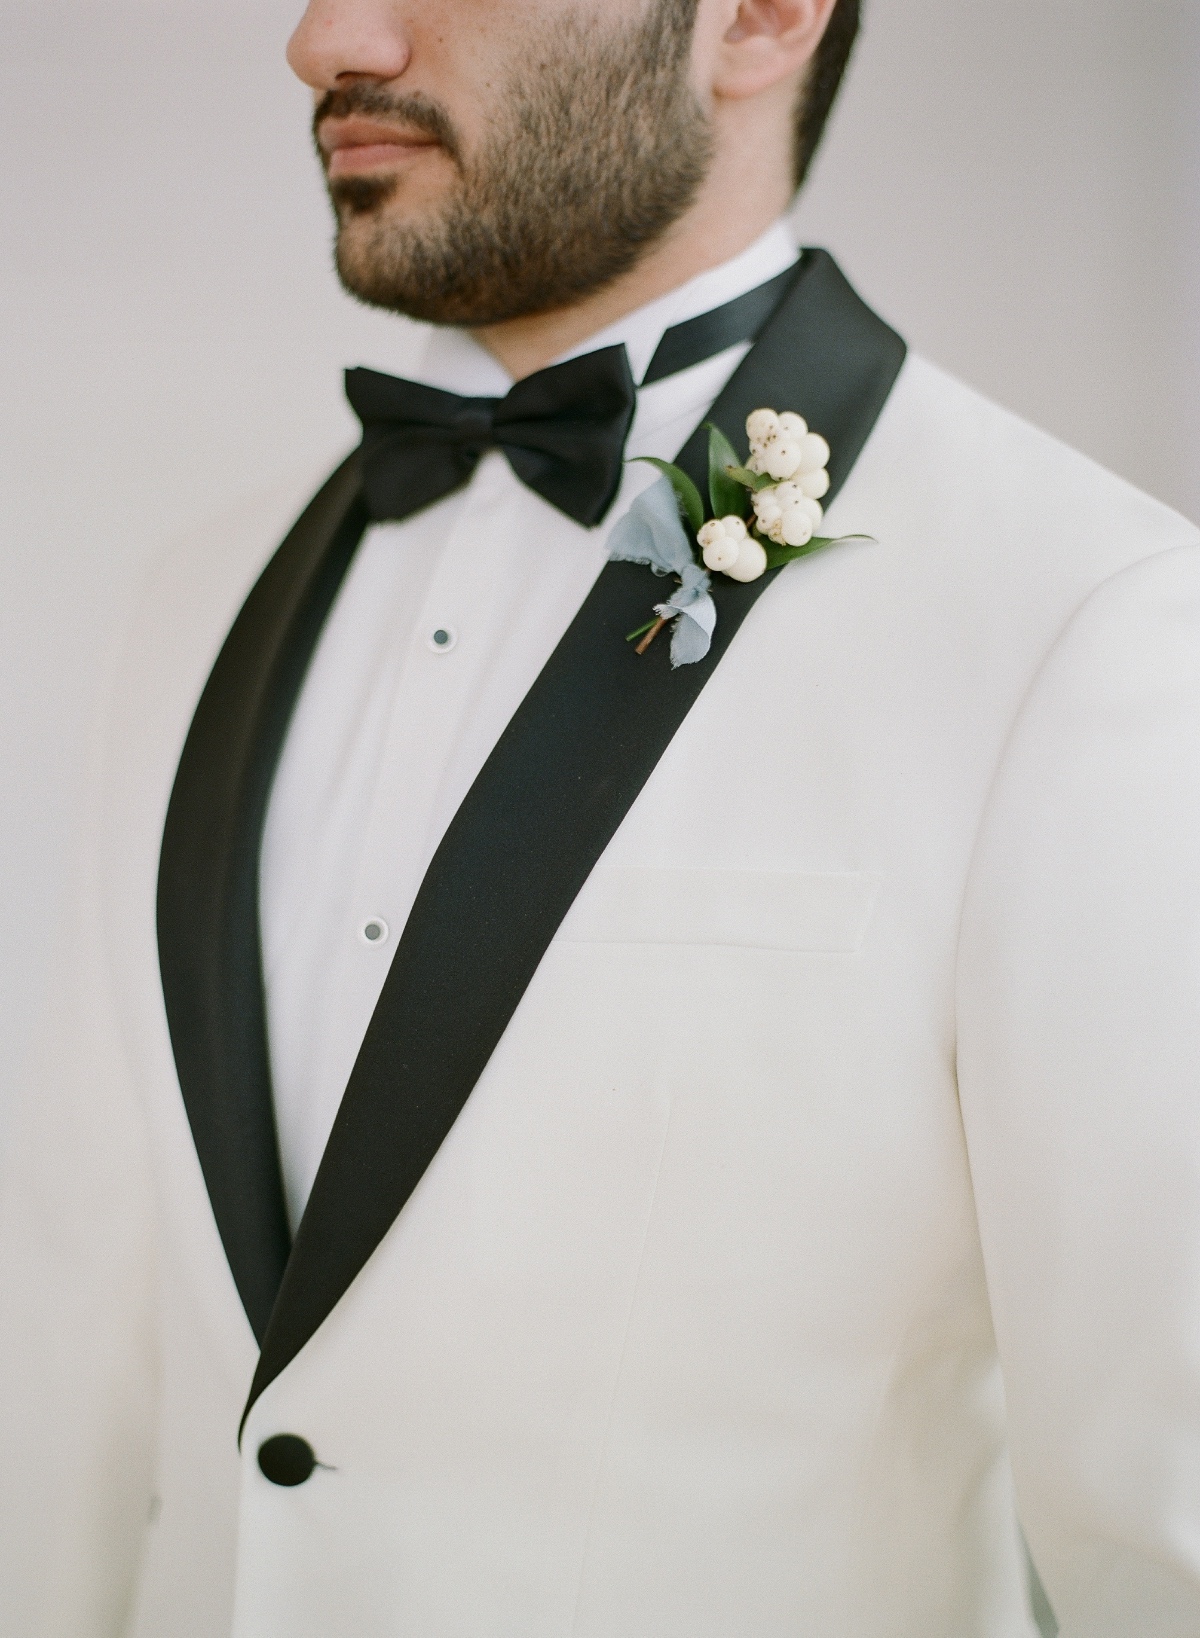 groom in white tuxedo with black accents